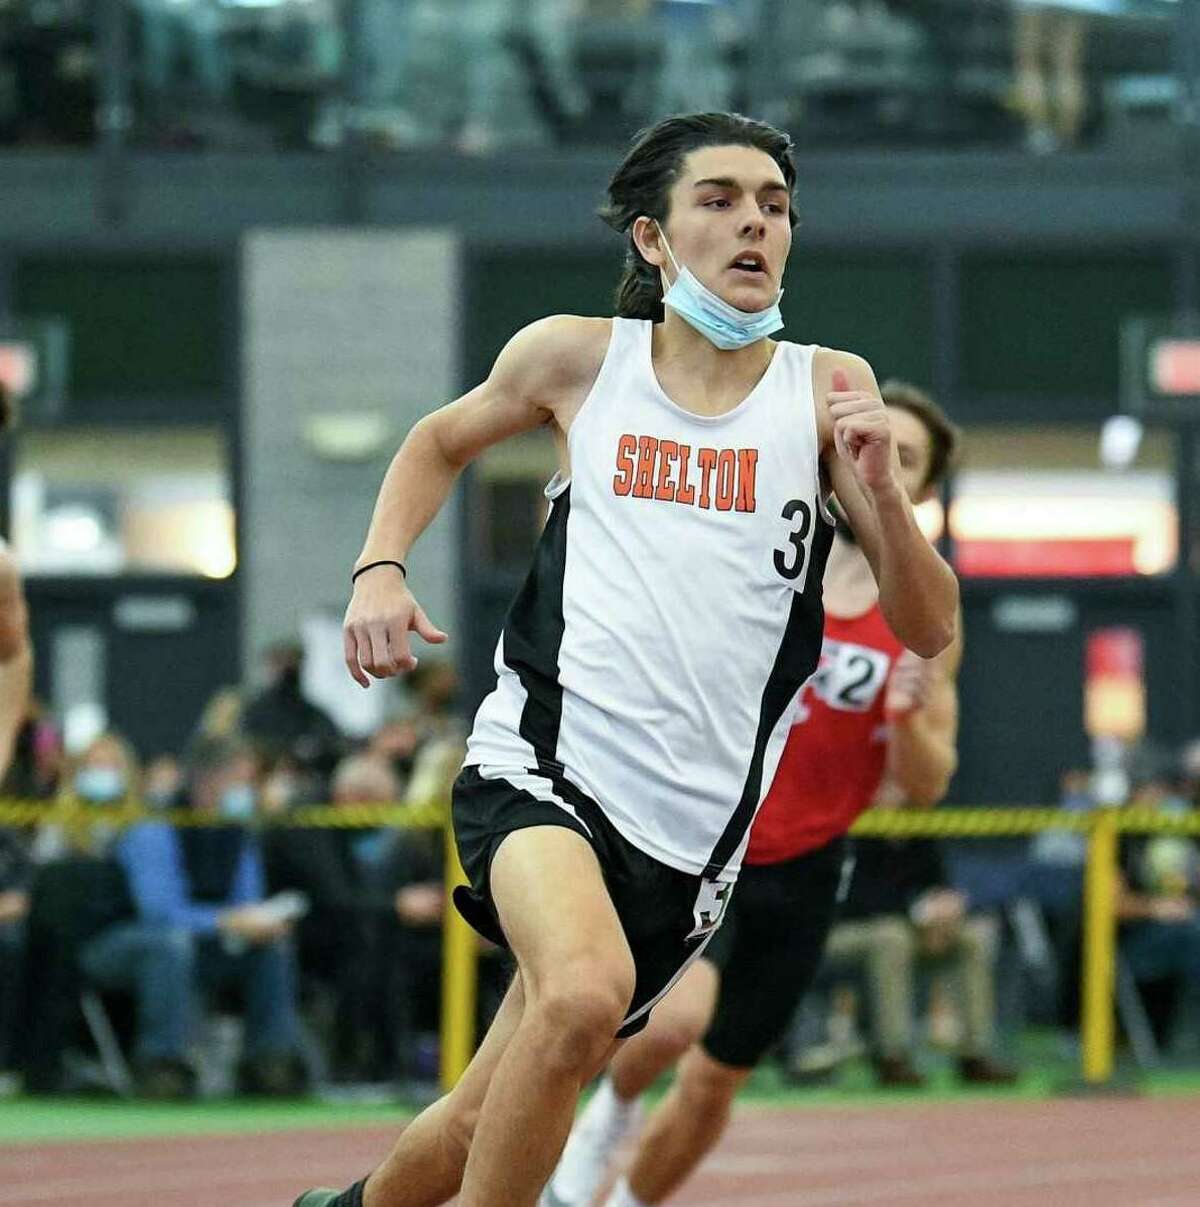 Luke Pacheco placed third in Class L in the 600-meter run.